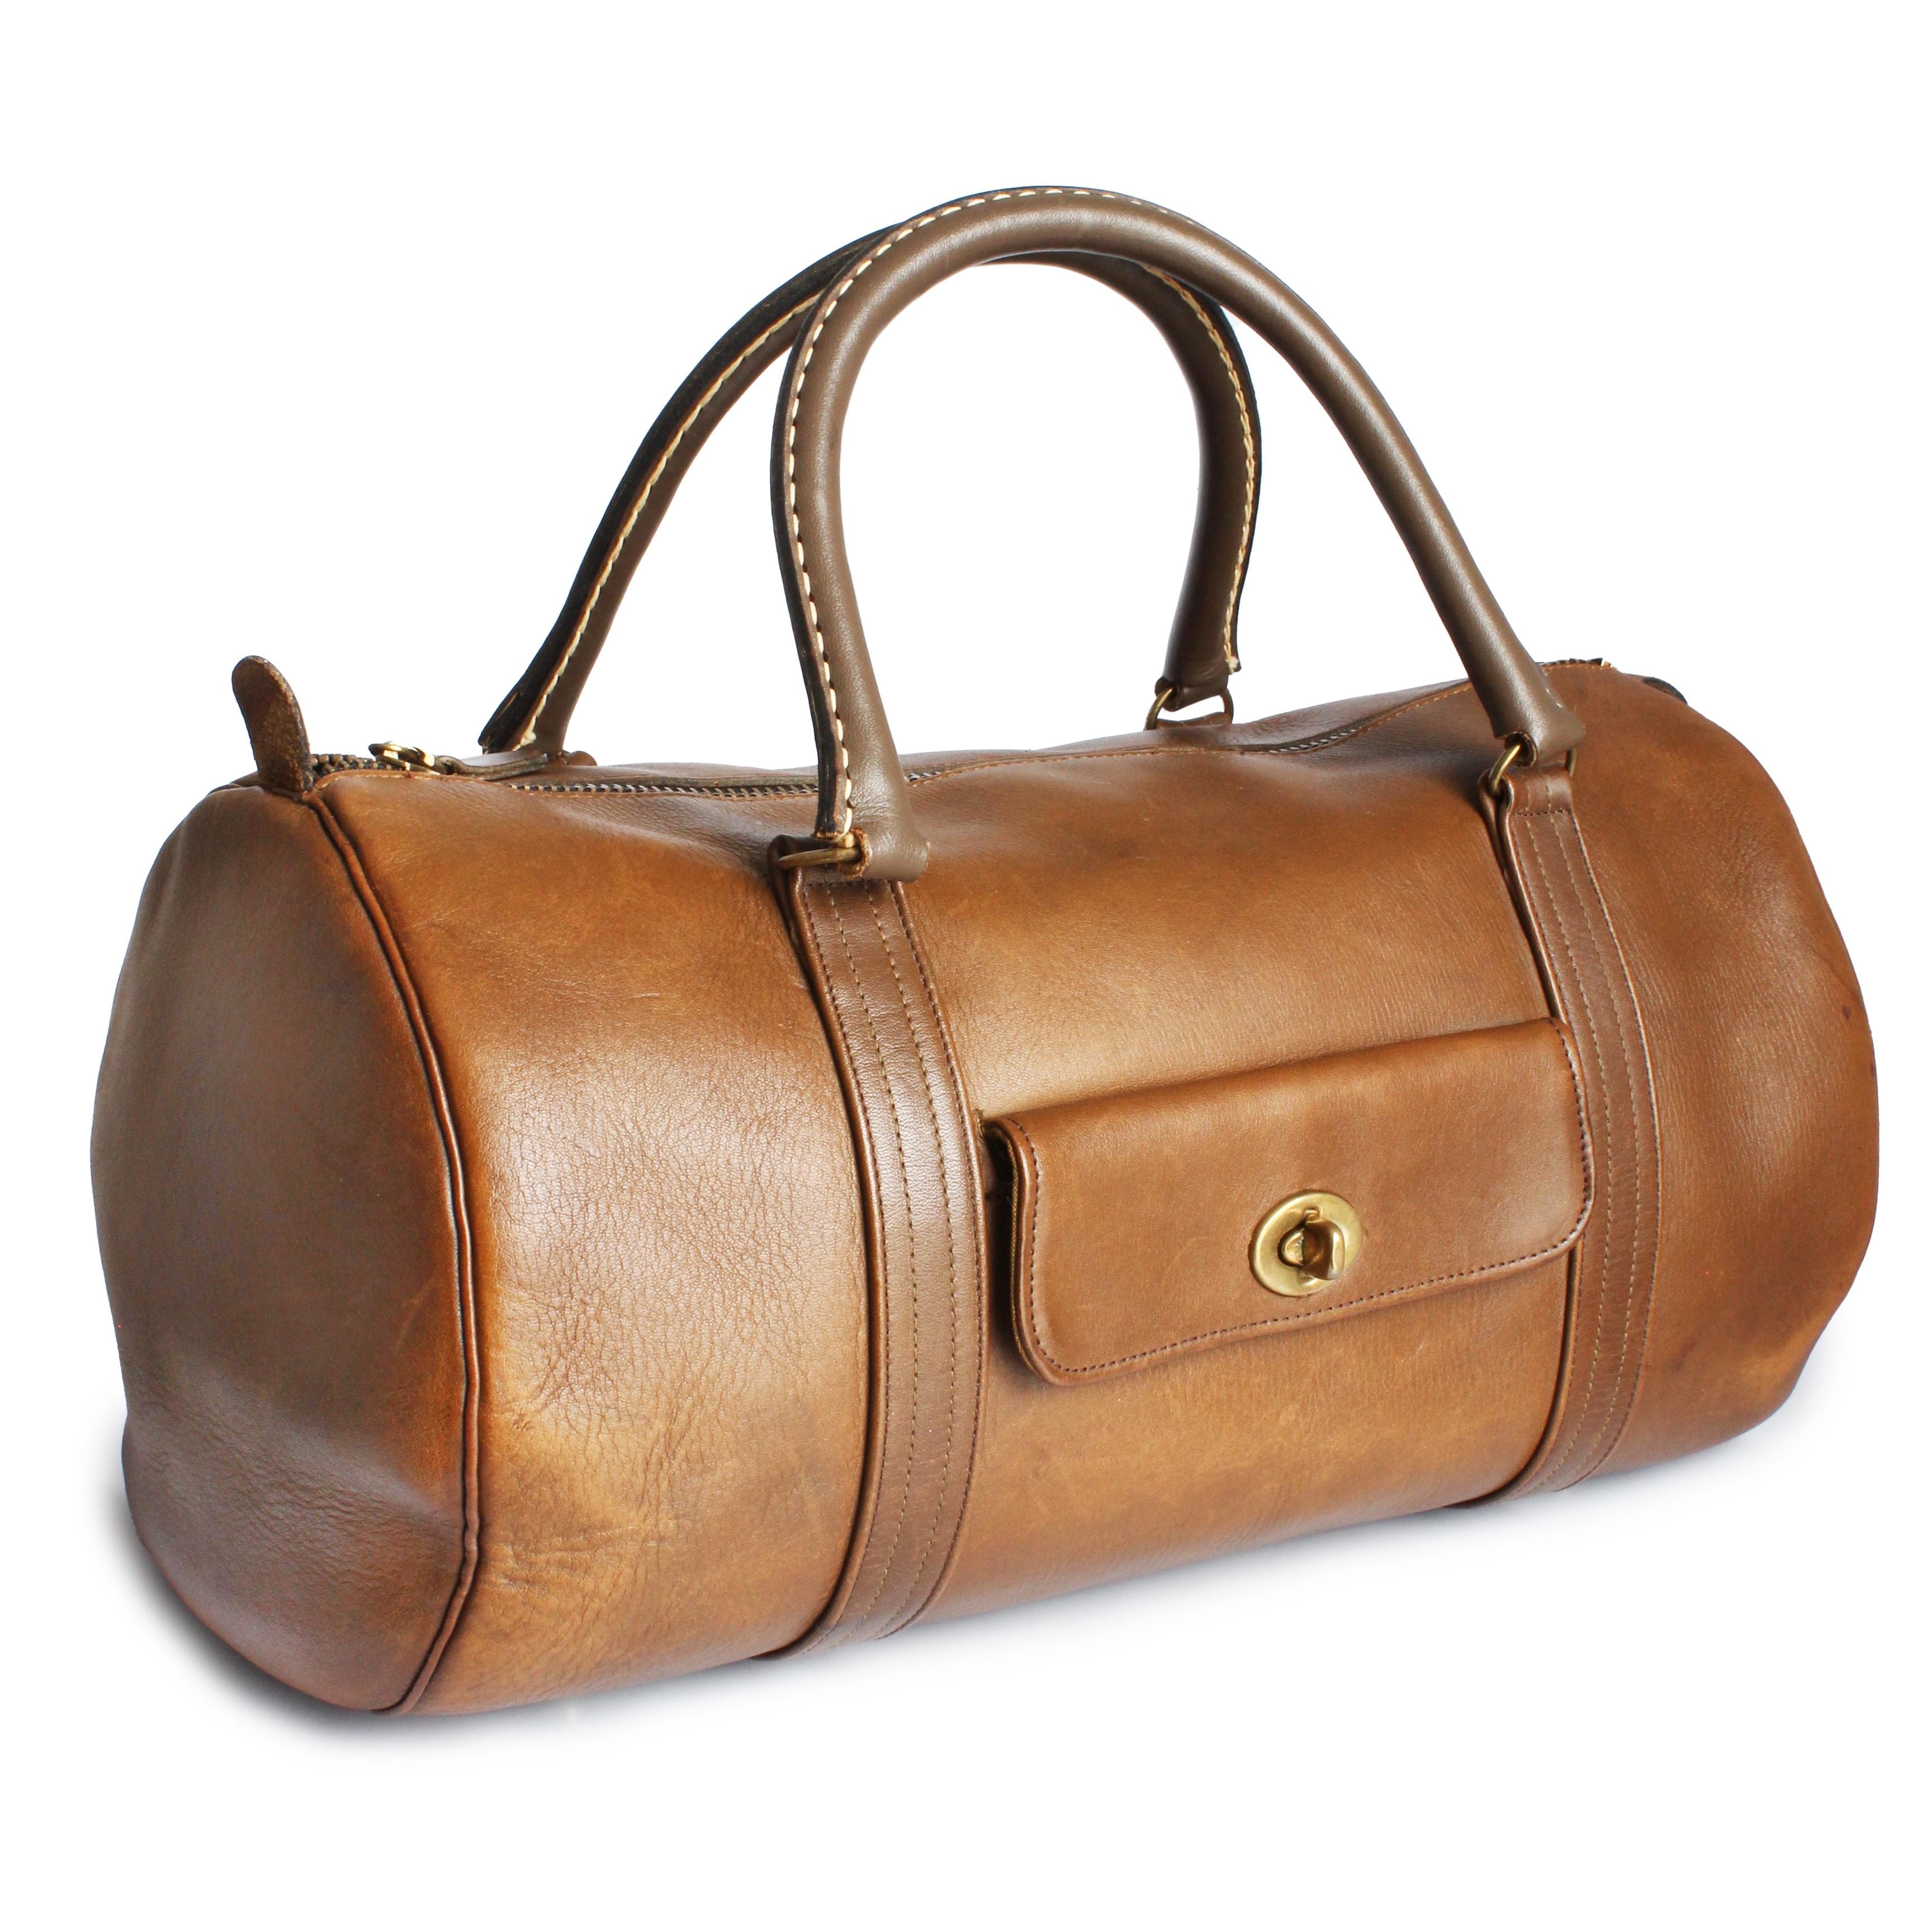 Authentic, preowned, vintage and super-rare Bonnie Cashin for Coach Safari DuffleBag Tote, likely made in the 60s.   Made from a brown-hued tan leather exterior, it features turn lock patch pockets on each side and double handles. The main